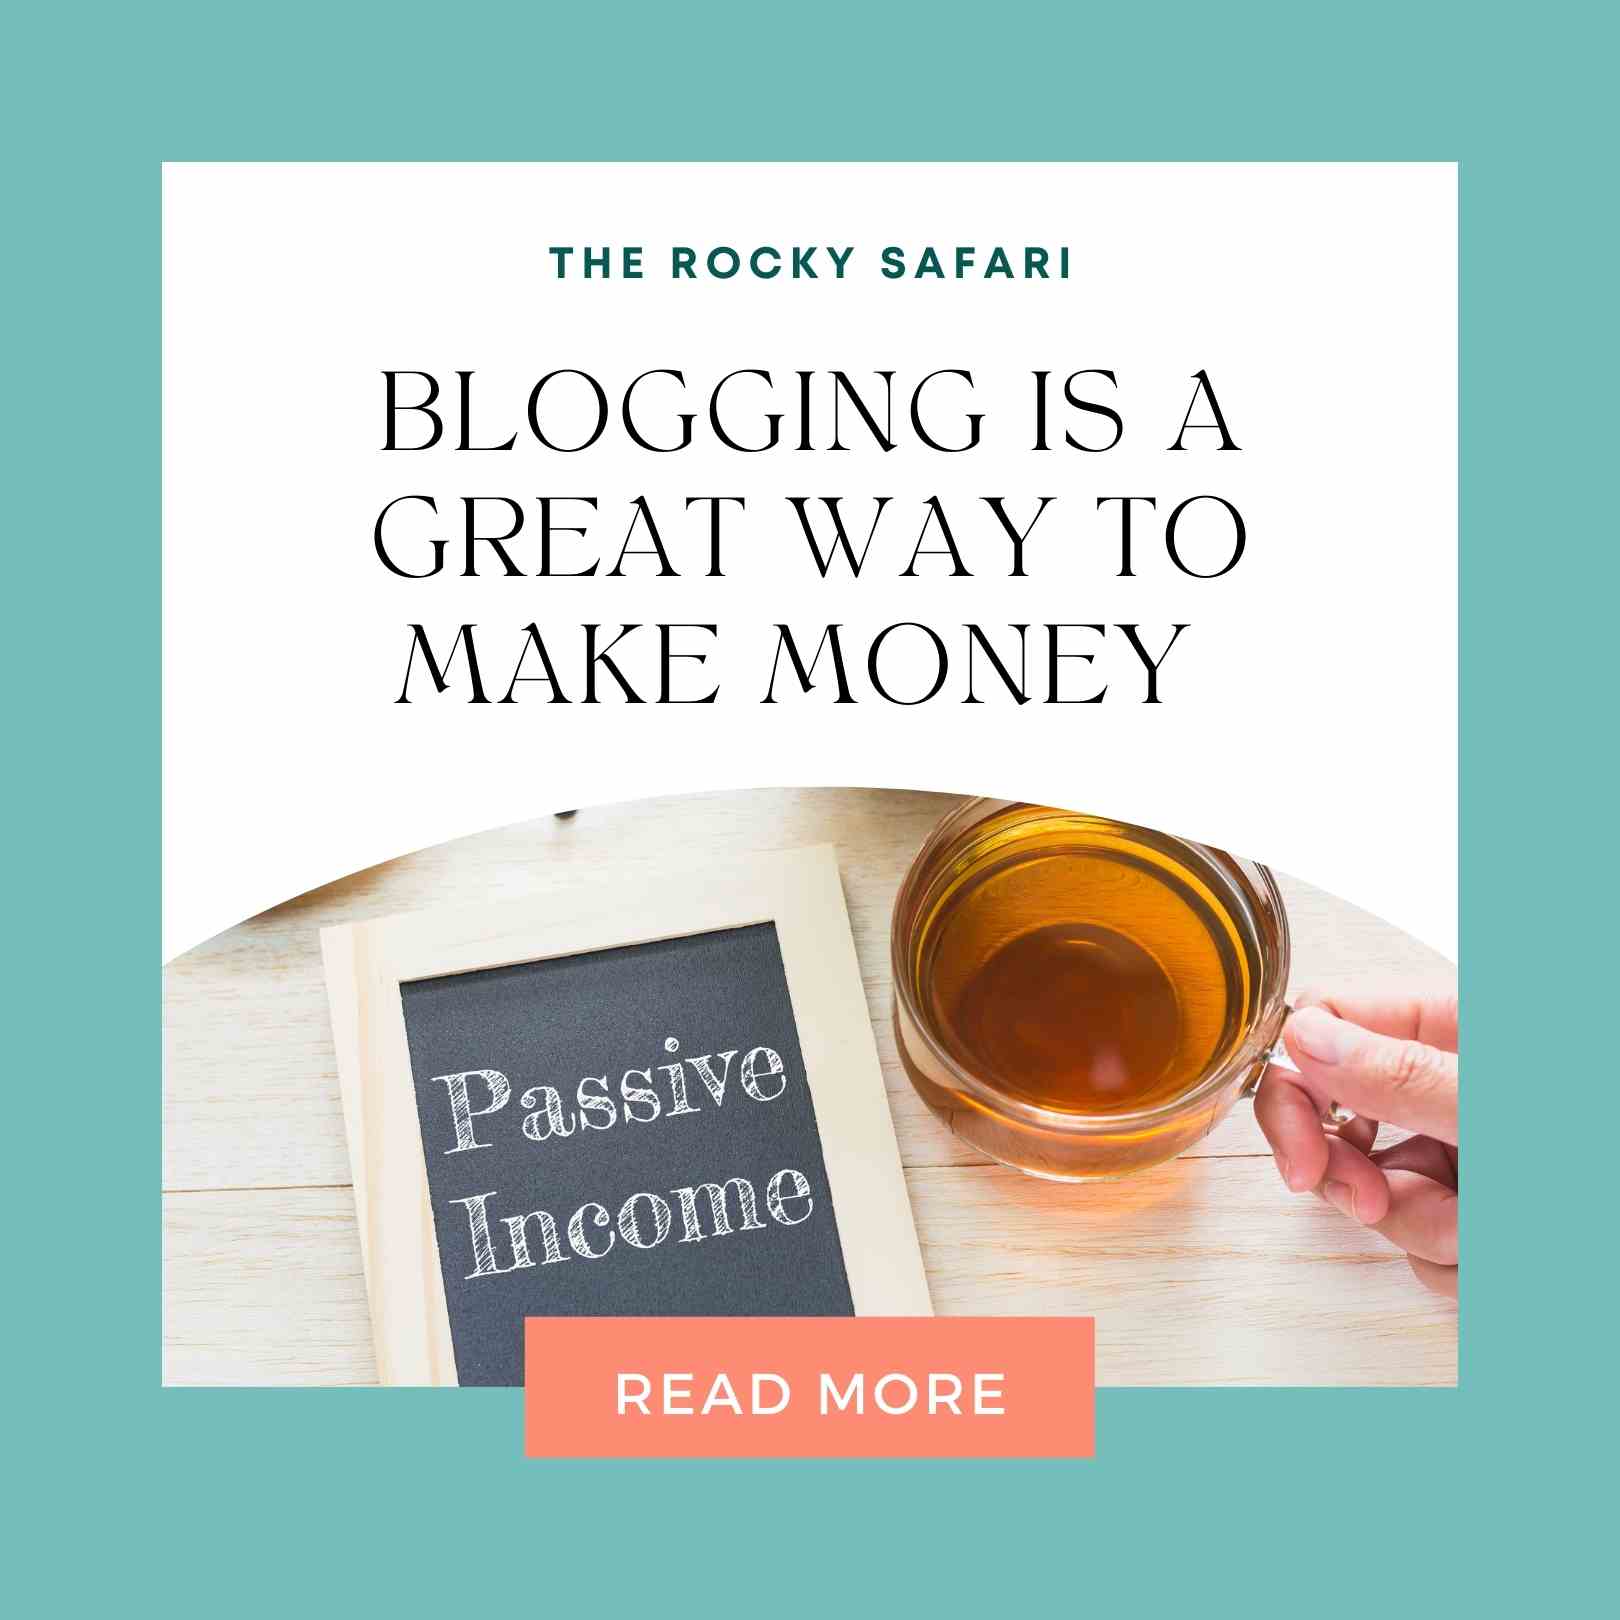 BLOGGING IS A GREAT WAY TO MAKE MONEY